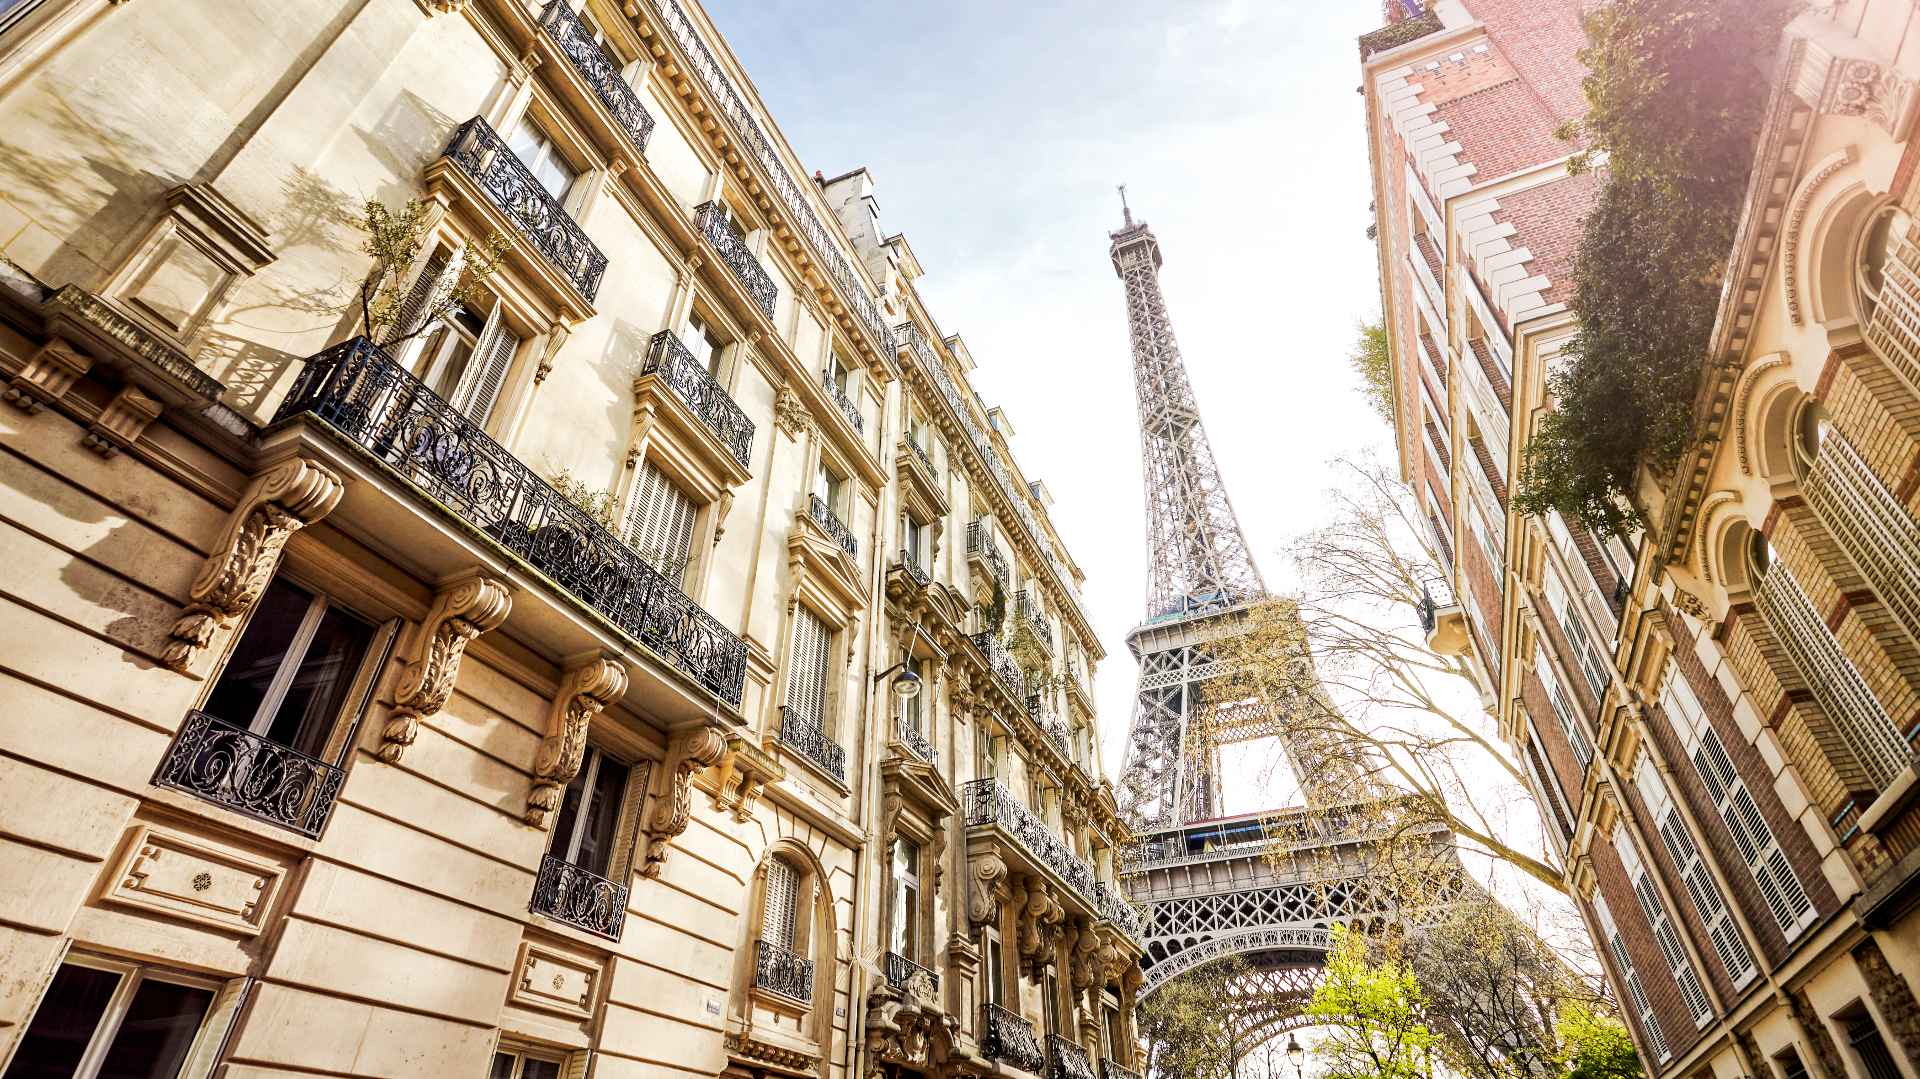 8 Of The Best Luxury Gyms In Paris - Jetset Times